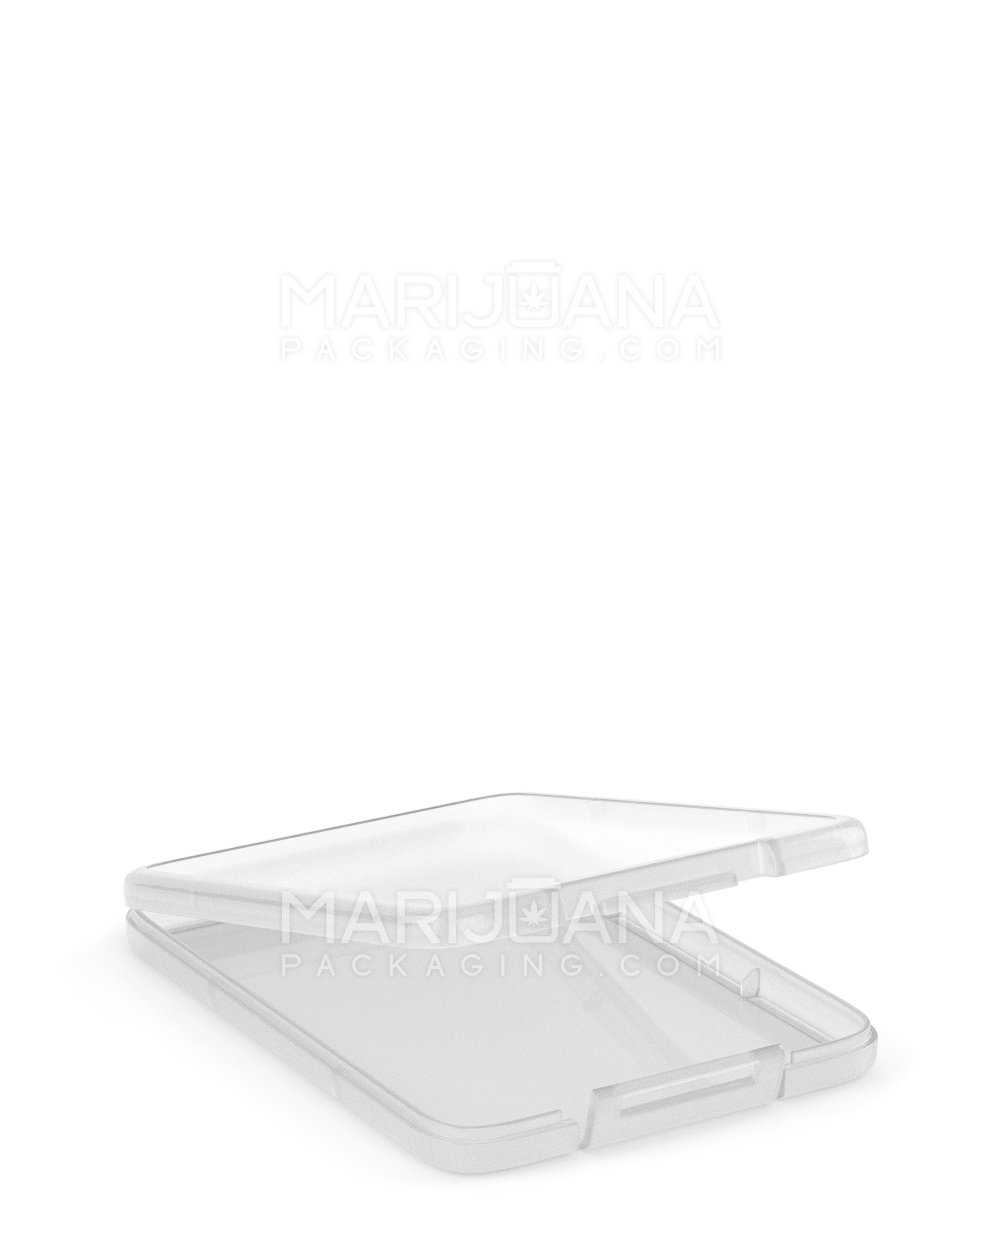 Hinged Lid Slim Shatter Container | 5.3mm - Clear Plastic - 1000 Count - 2